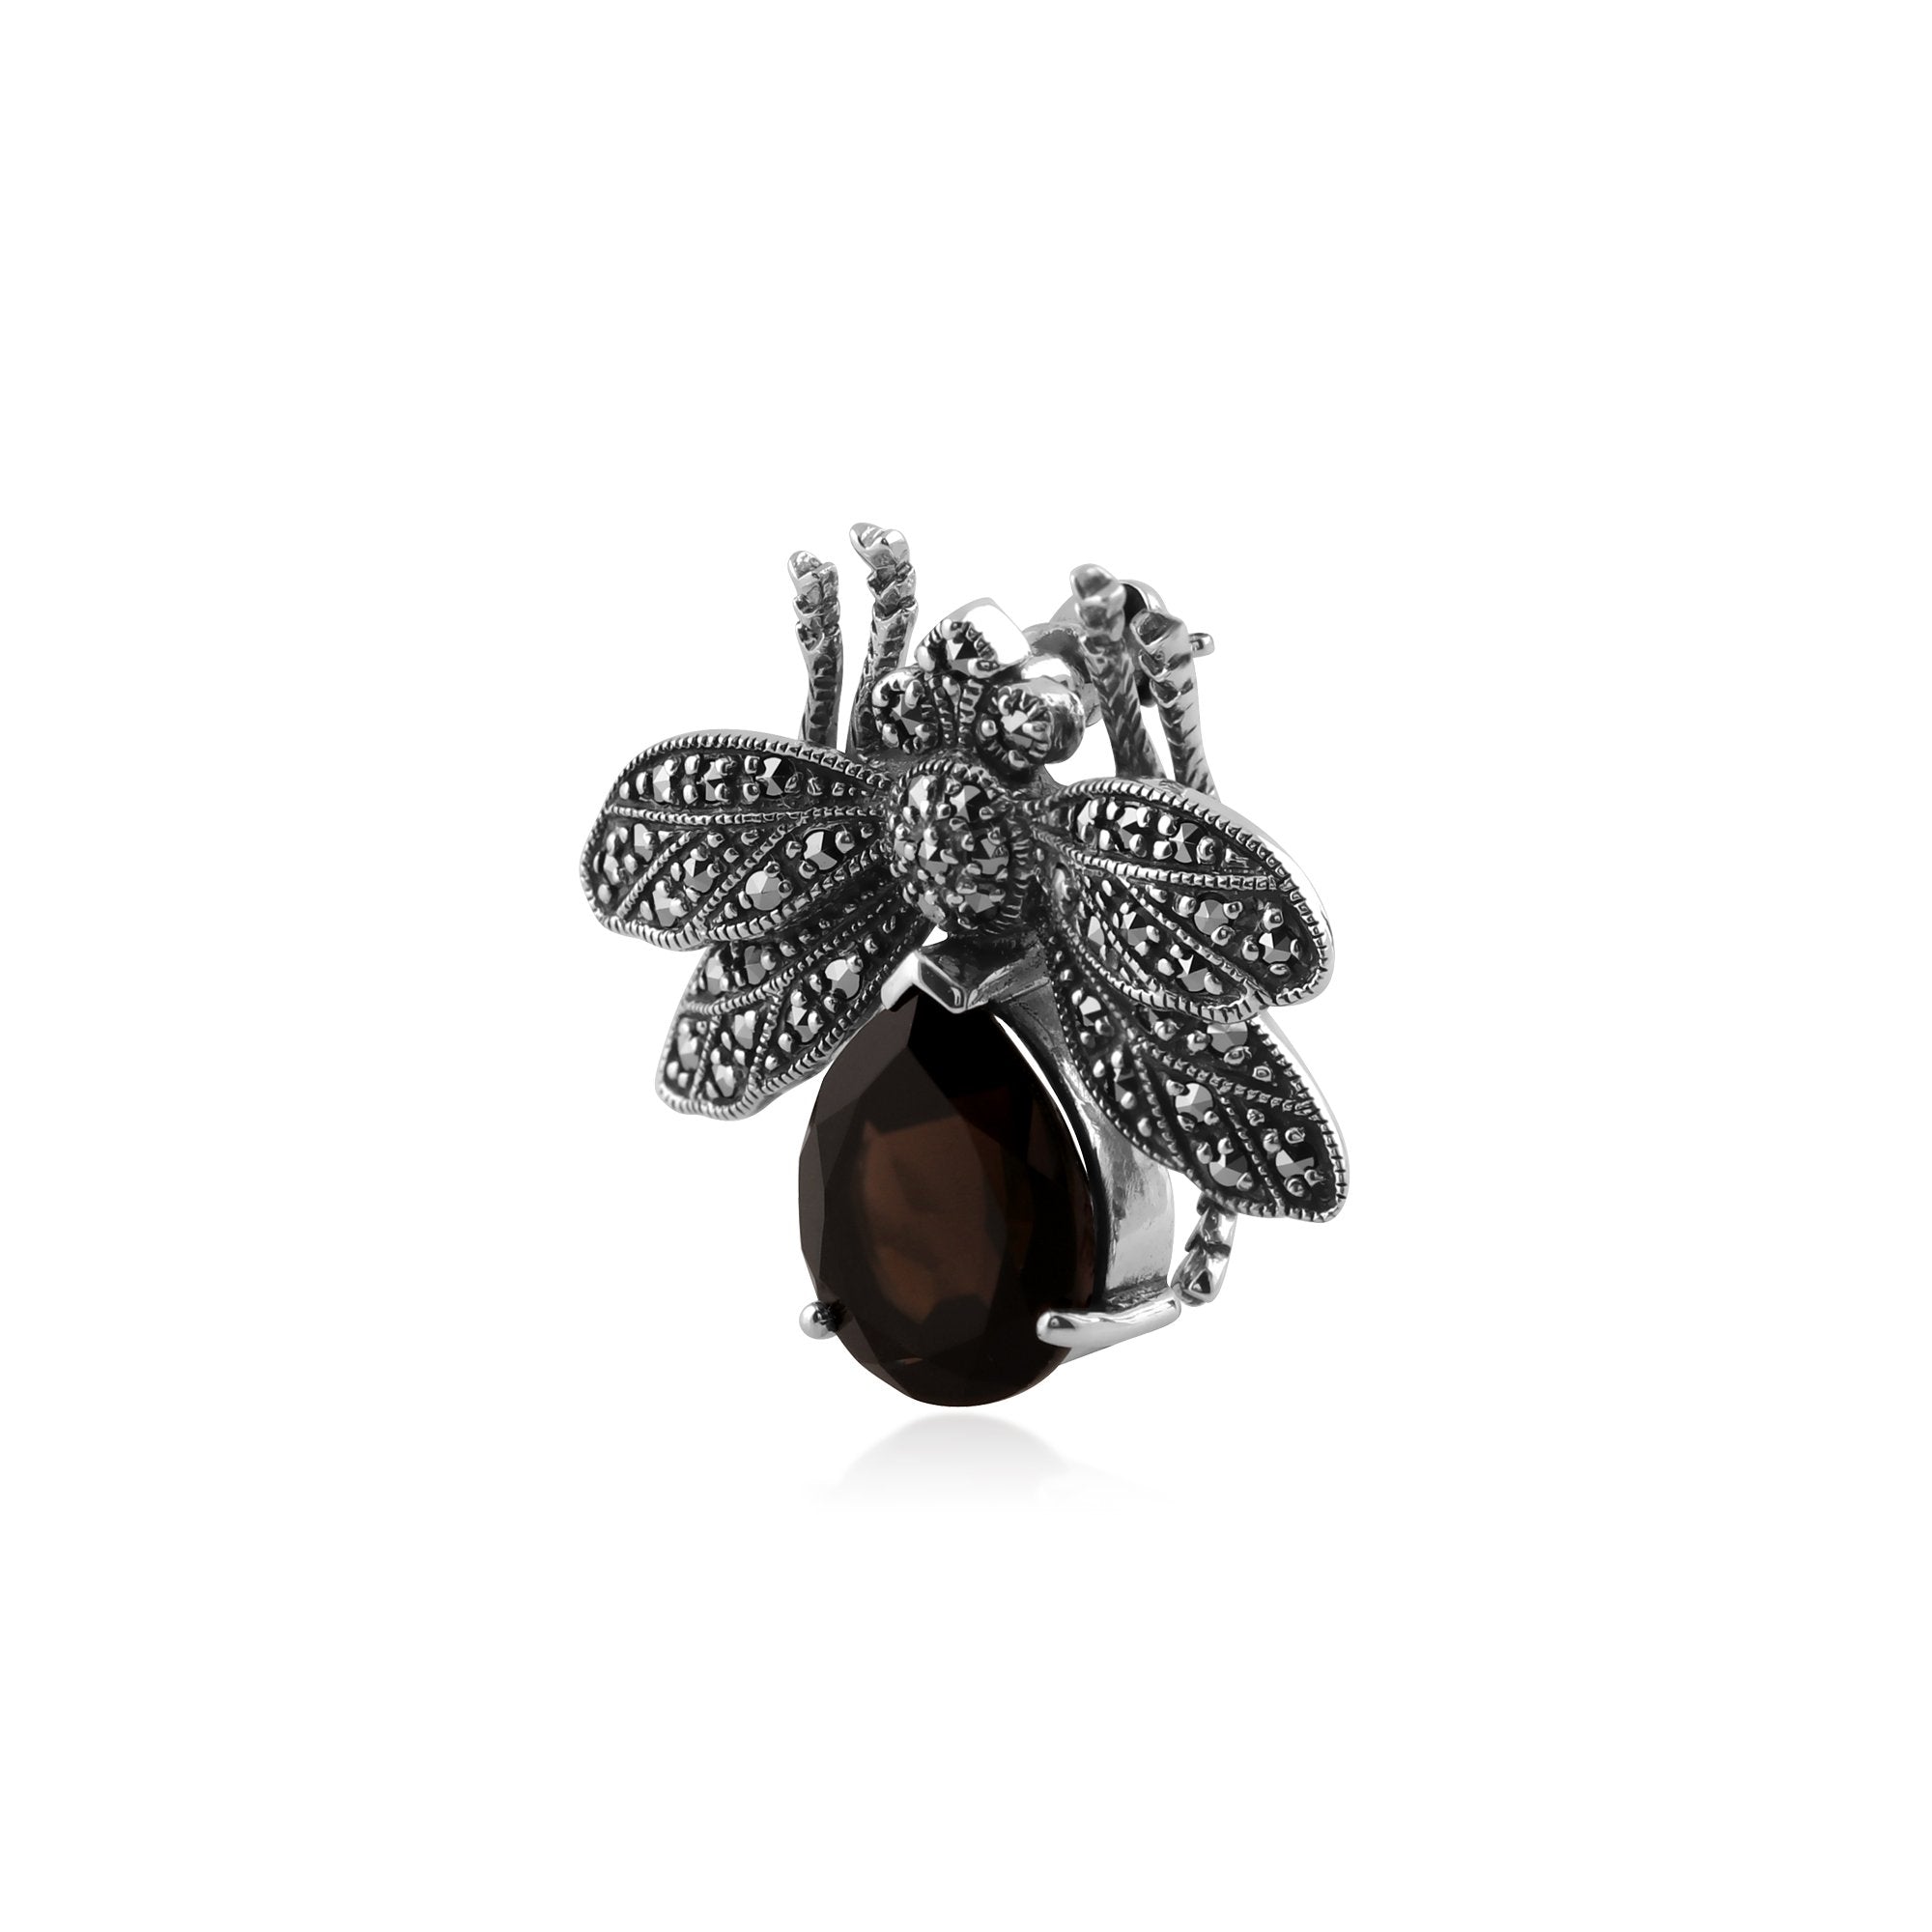 Classic Pear Marcasite & Smokey Quartz Bumble Bee Brooch in 925 Sterling Silver